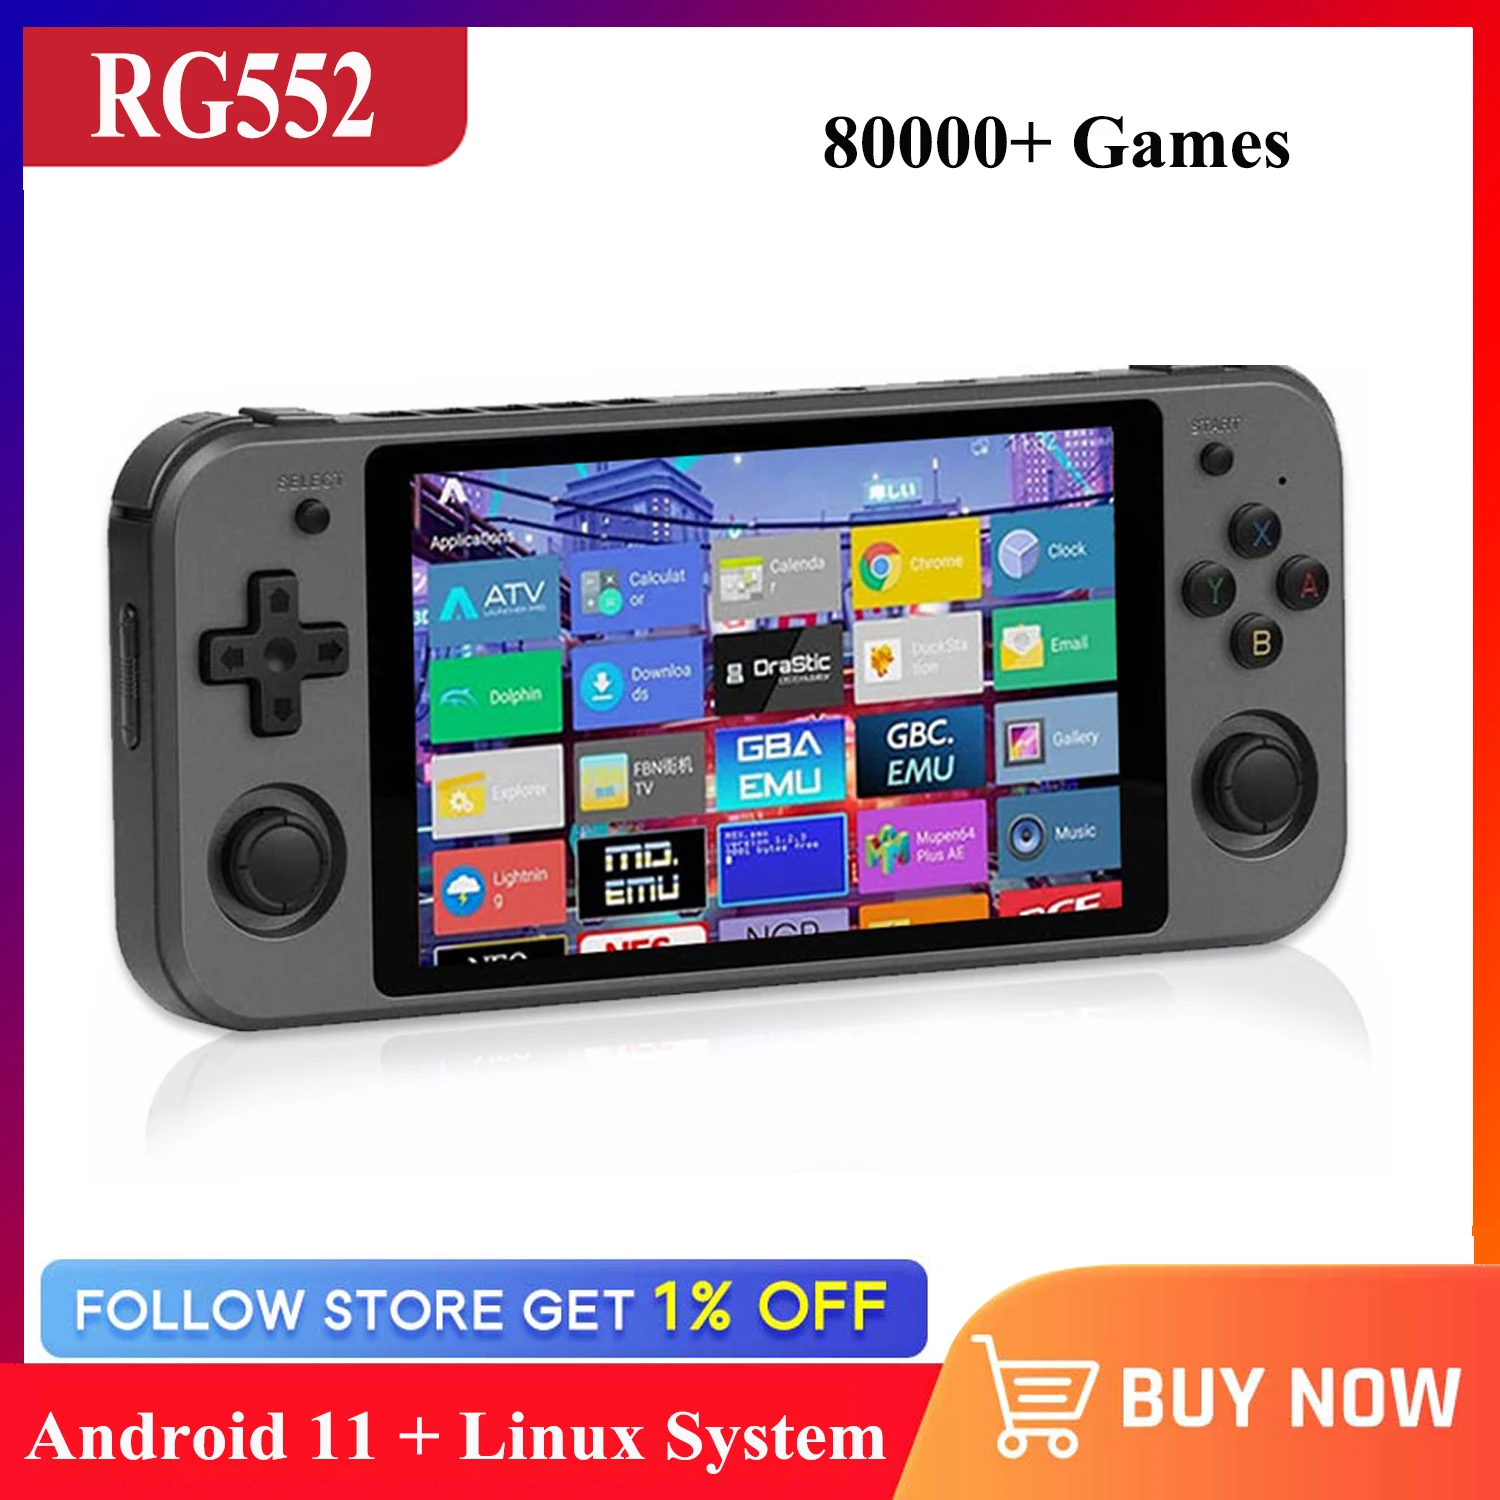 

RG552 Anbernic Retro Video Game Console Dual Systems OS Android Linux 5.36 Inch IPS Pocket Handheld Touch Screen Game Player